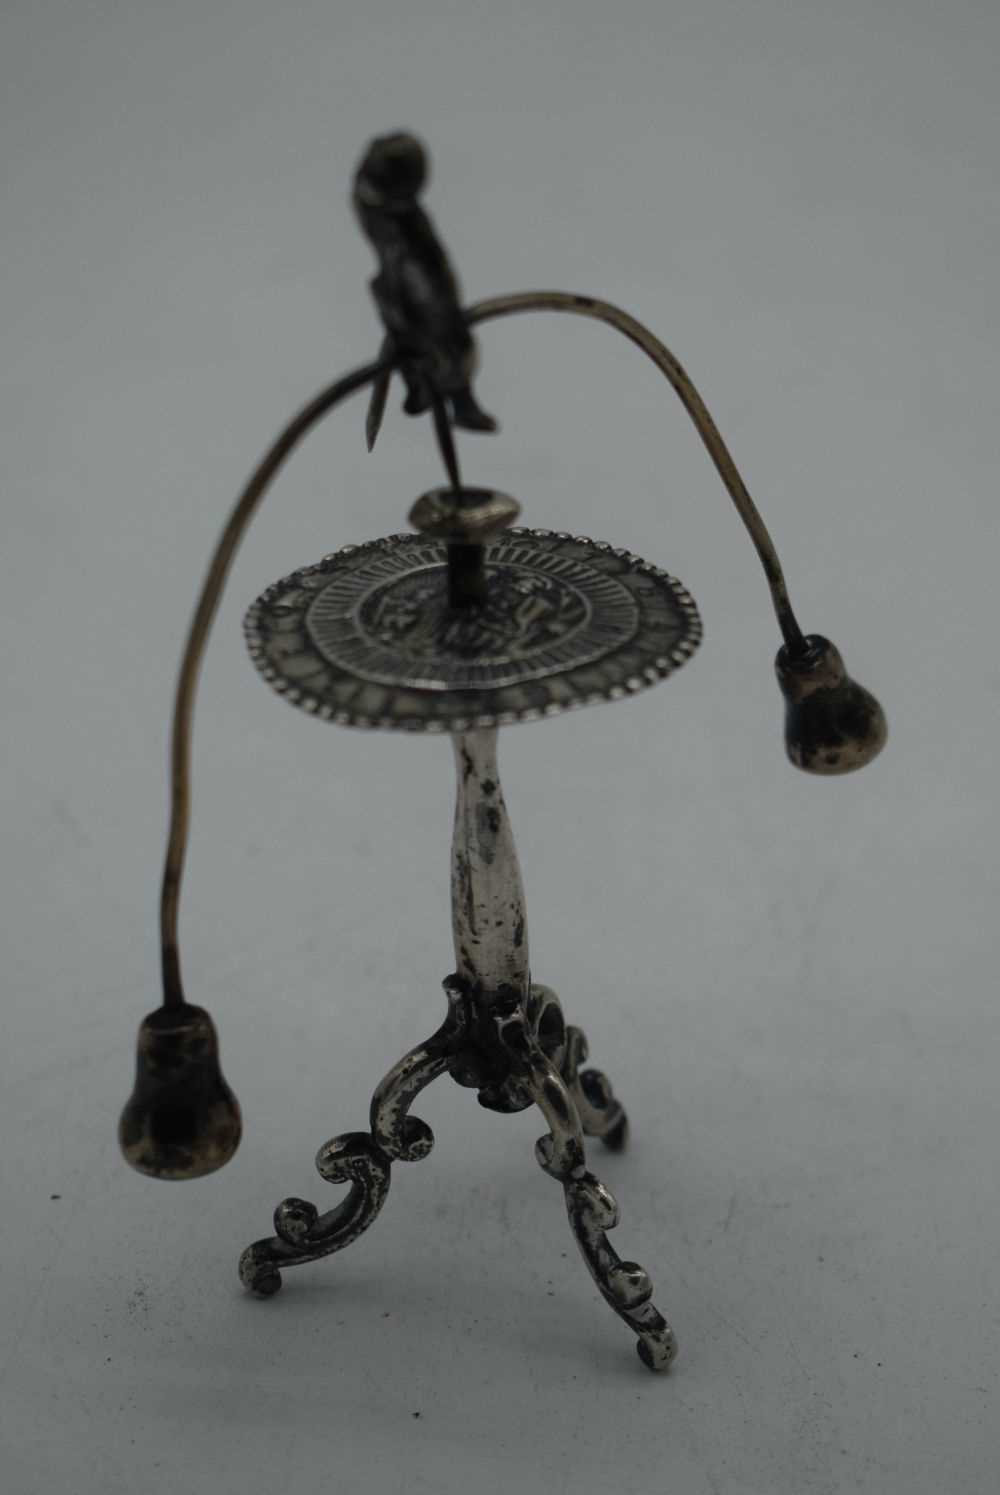 A RARE 18TH CENTURY CONTINENTAL SPINNING MALE TABLE TOY probably Dutch silver. 75 grams. 12 cm x 9.5